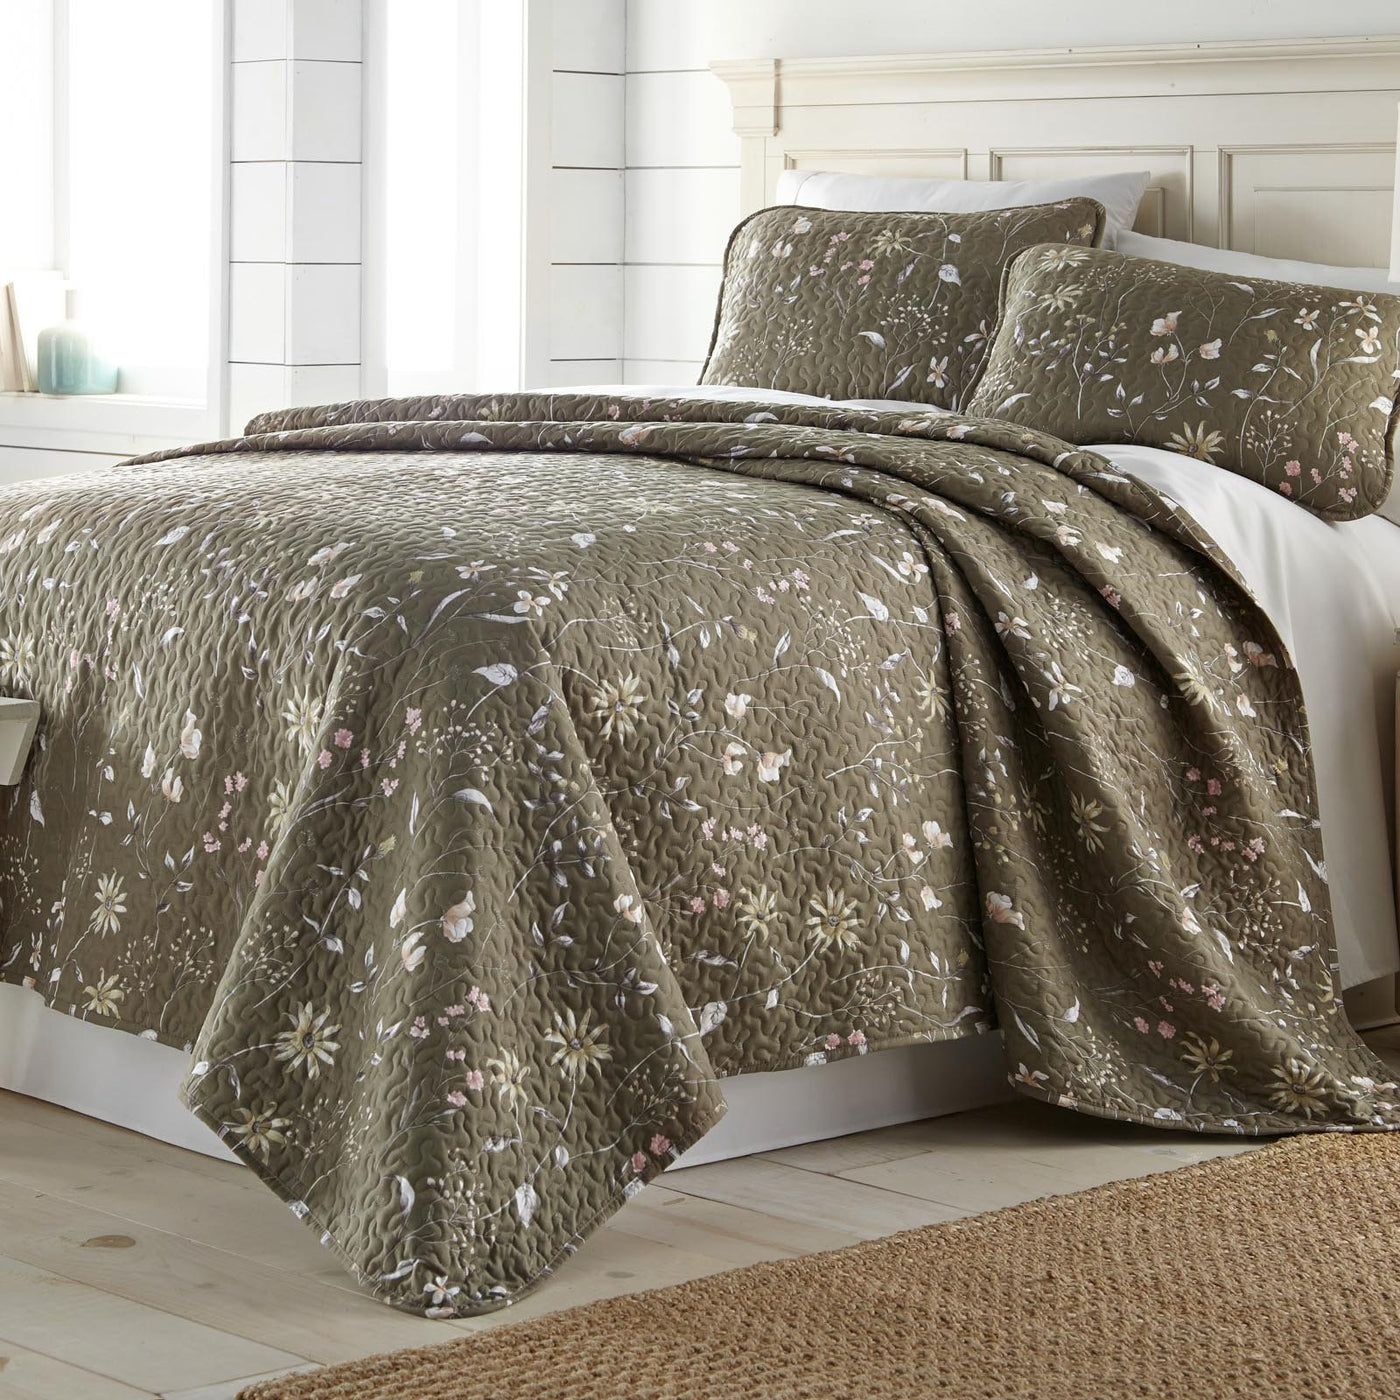 Floral Daydream in olive brown floral print quilt set